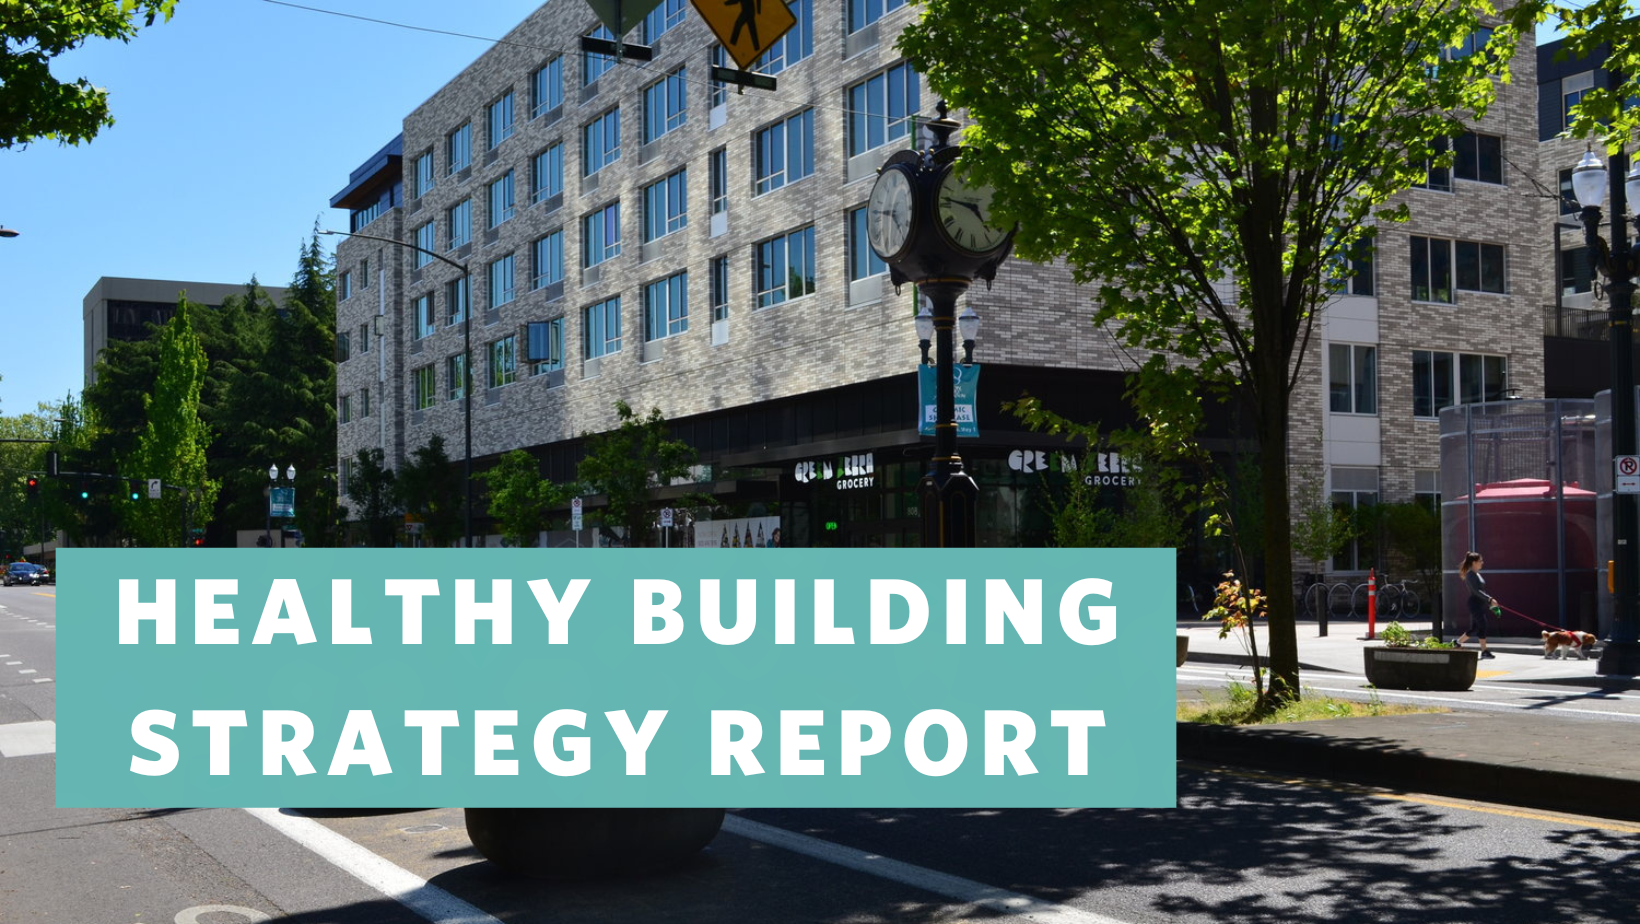 Picture of an six story apartment building in Lloyd with the words "Healthy Building Strategy Report" overlaid.